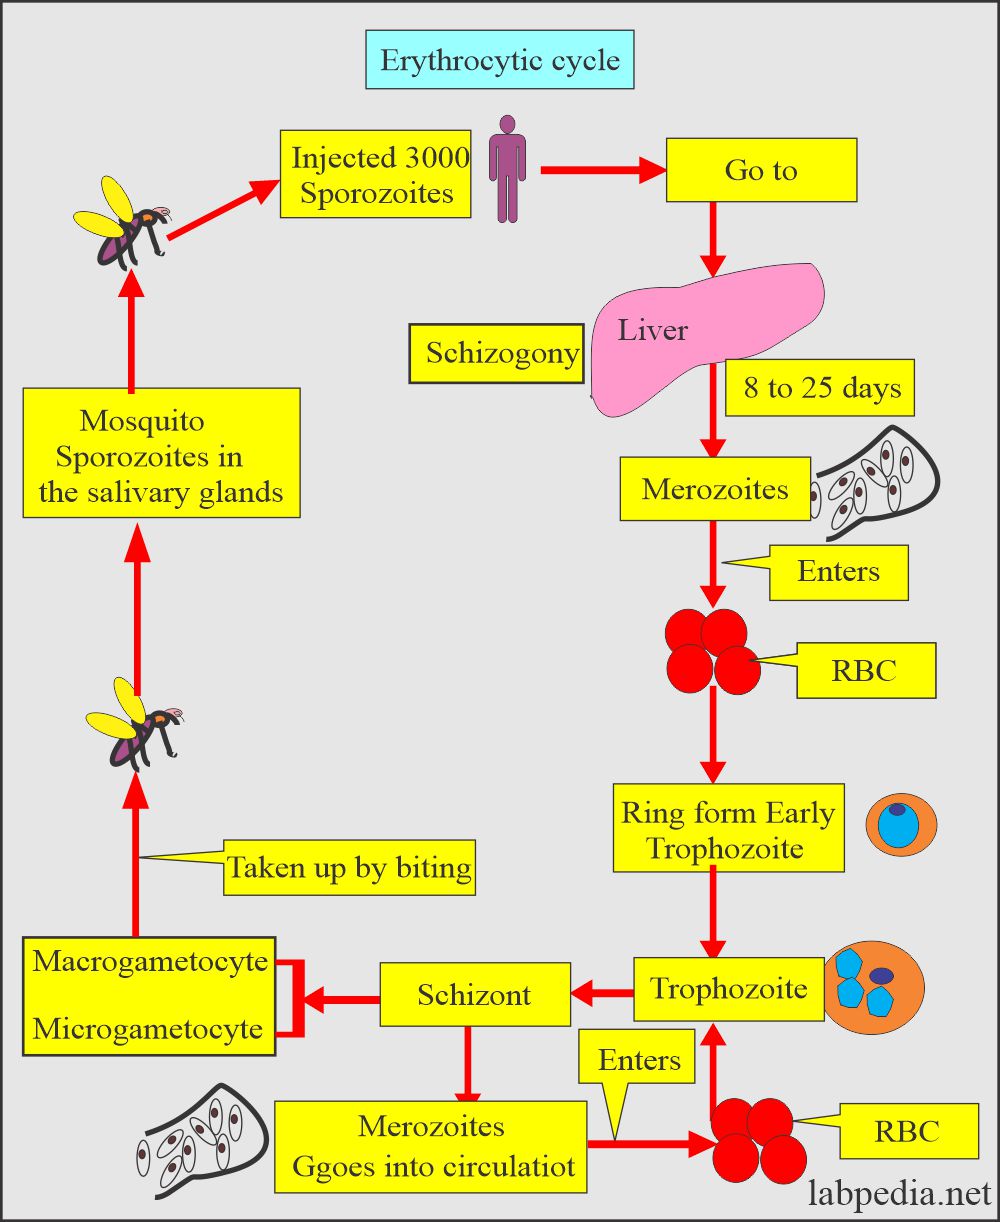 Erythrocytic cycle of malarial parasite